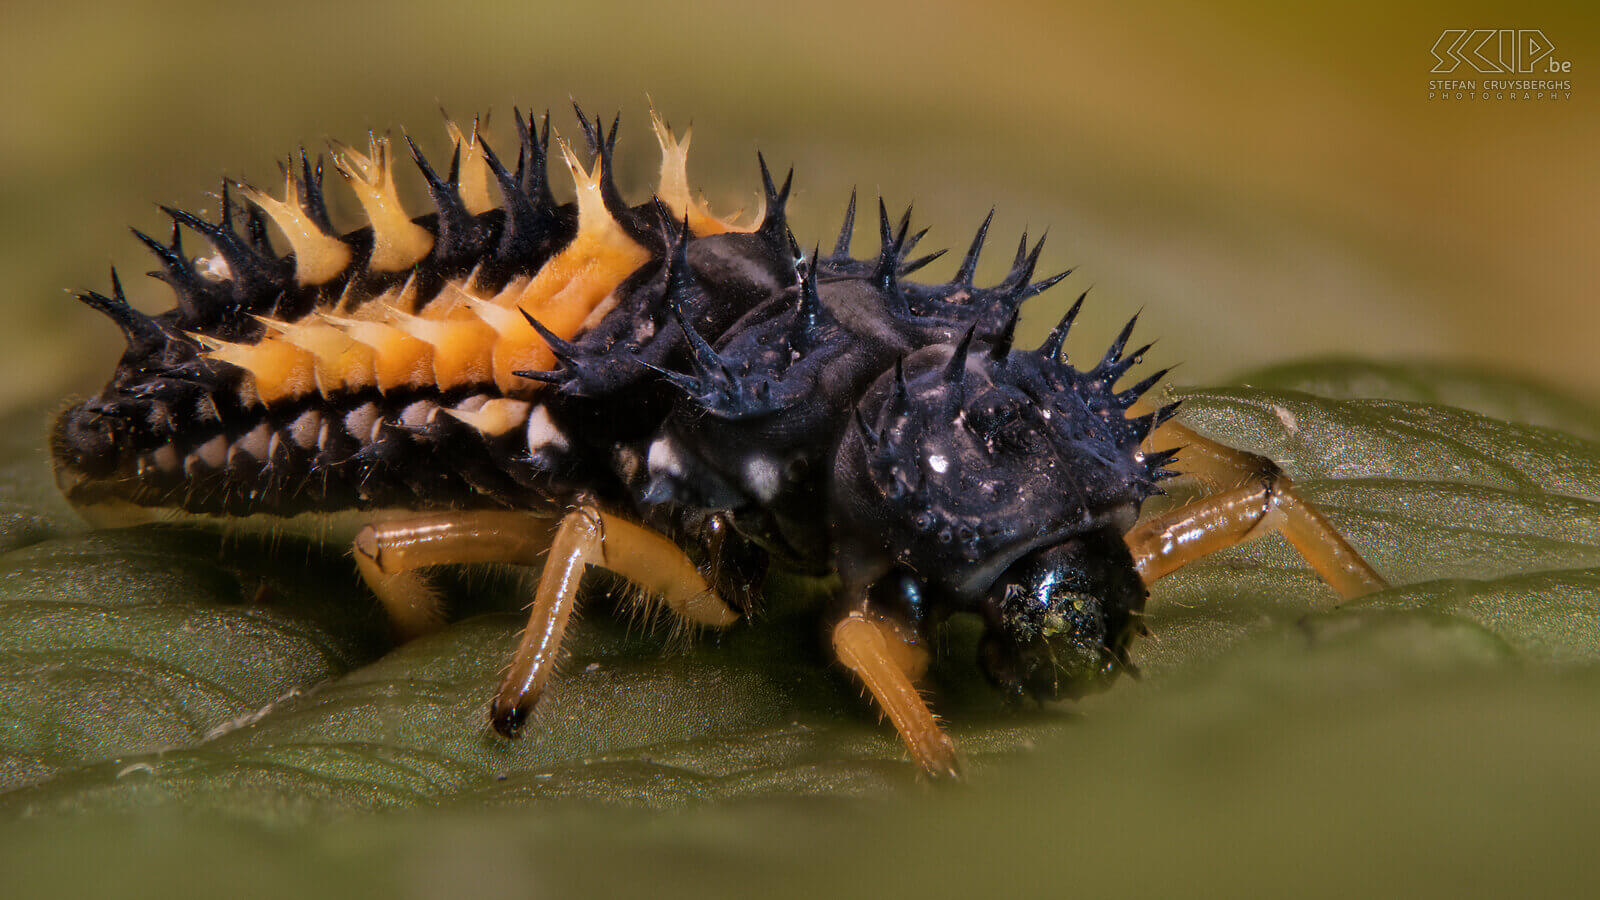 Extreme close-ups of insects - Ladybug larva This year I focused on micro photography, the superlative of macro photography. I develop my own automated macro rail with which I can make 30 to 60 images in steps of 100 to 300 microns (thousandth of a millimeter) and then merge them. This way I can make razor-sharp images of insects that want to sit still for a few minutes. Obviously, the latter is not and technically it is always quite a challenge. By using extension rings between your camera and macro lens you can take extreme close-ups. But the big drawback is that the depth of field is less than 1mm. This is almost always insufficient to properly portray an insect. The solution is an automated macro rail that can create a whole series of images that you can then merge with software.<br />
<br />
There are many expensive commercial solutions, but I created automated rail myself. My father-in-law developed the hardware with a rail with a stepping motor and some extra electronics and 3D printed parts. I developed software for my Windows PC that controls my Nikon camera and software for a Raspberry Pi that controls the electronics. The end result works really well and these are my best images of extreme close-ups of insects. Stefan Cruysberghs